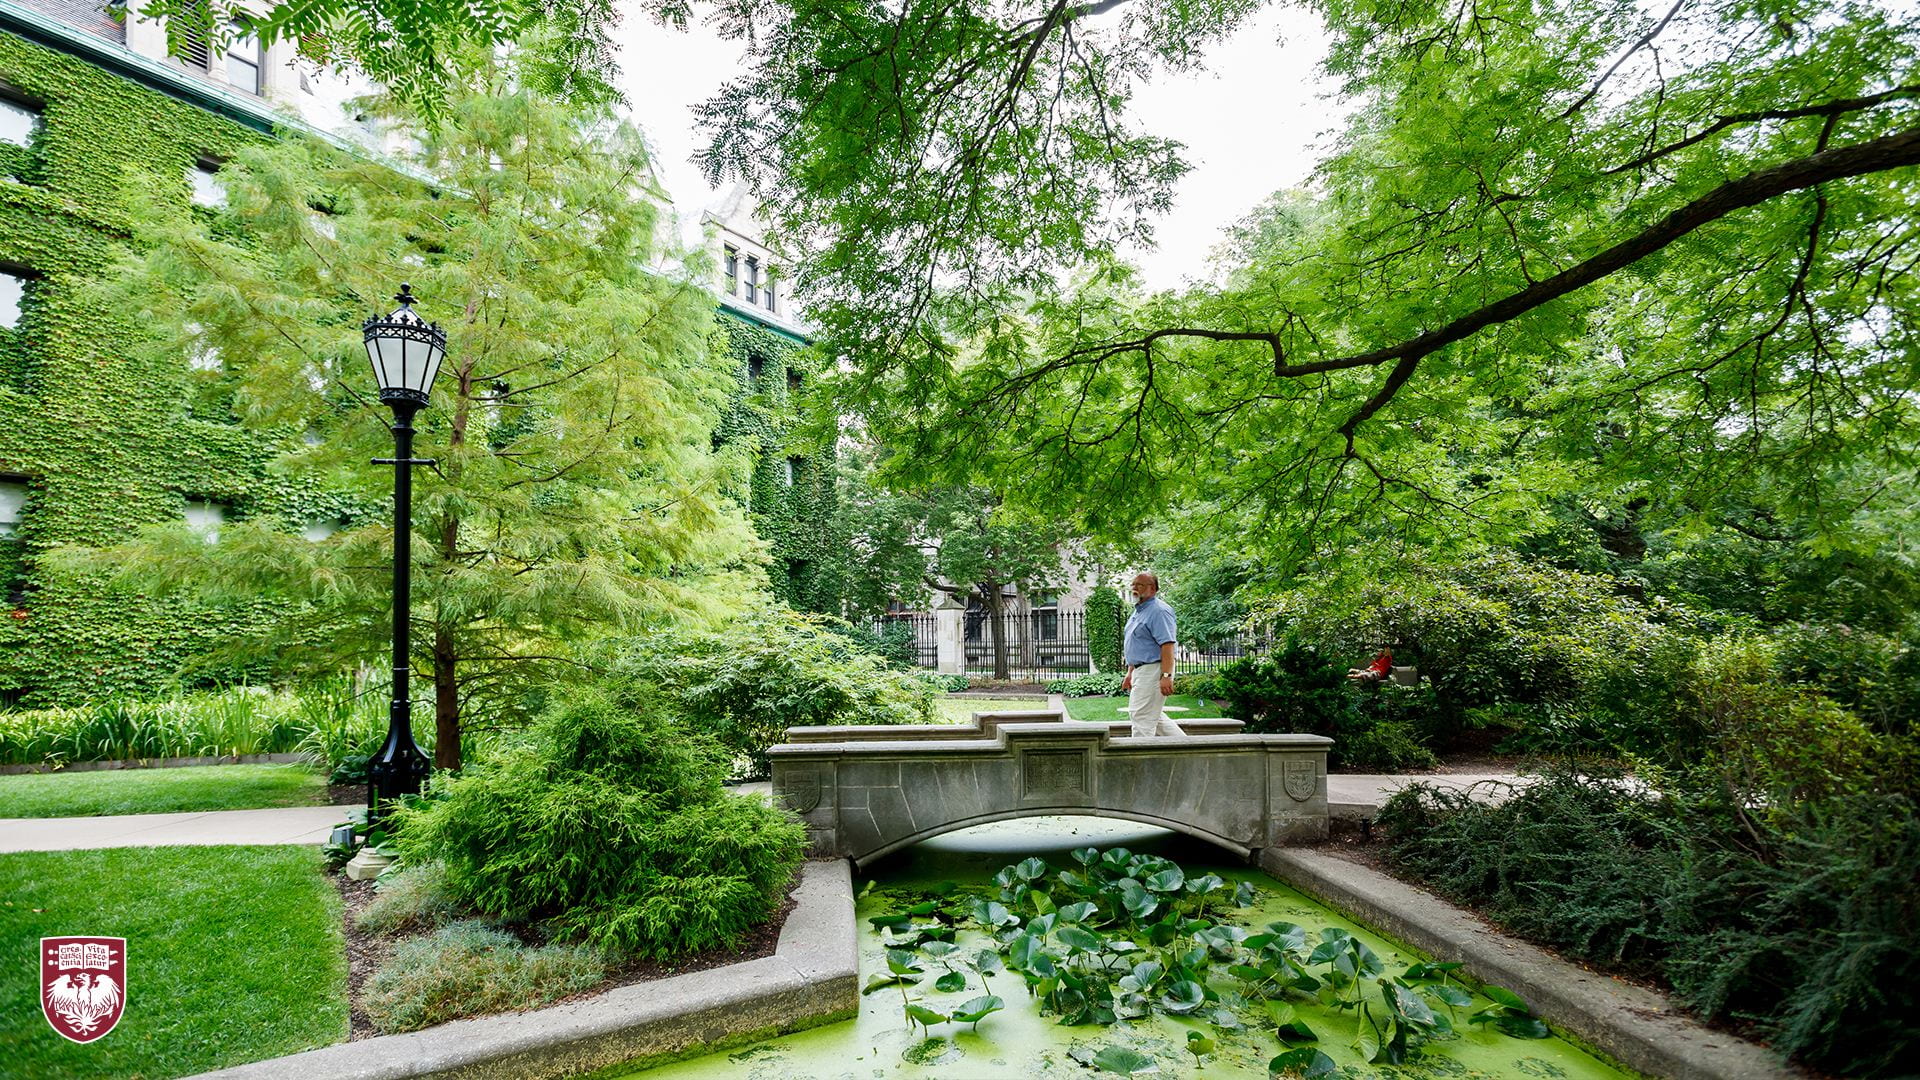 Person crossing the stone bridge over Botany Pond surrounded by green trees